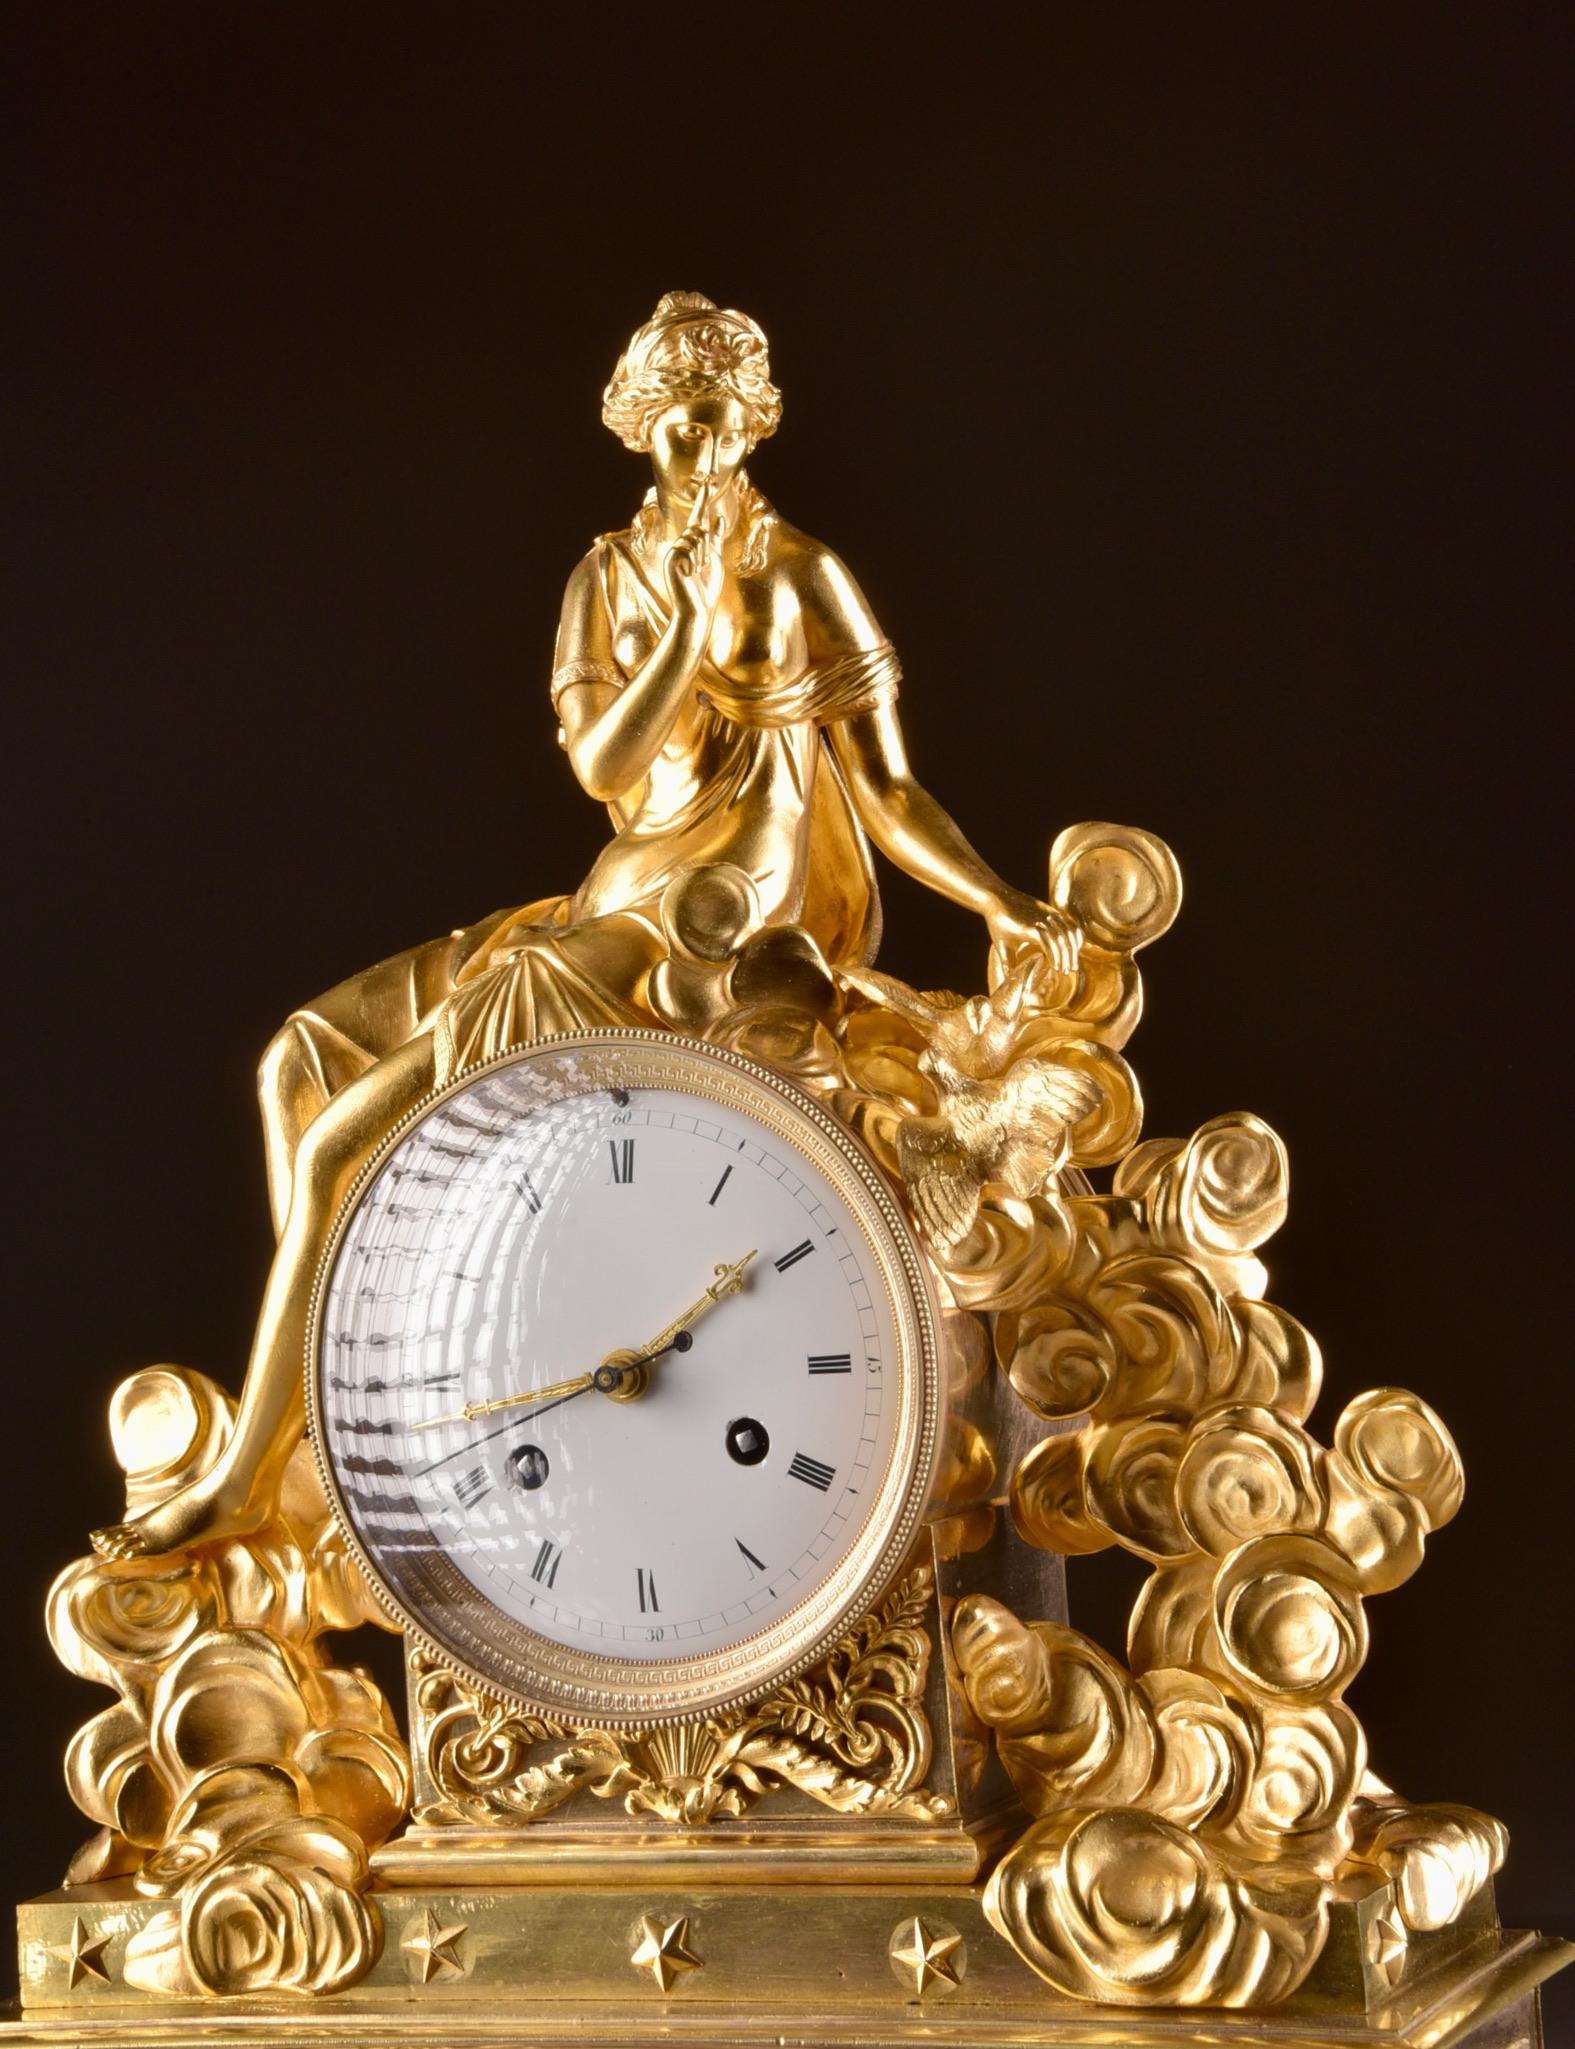 Gilt Rare Large Romantic French Directoire Mantel Clock, Late 18th C For Sale